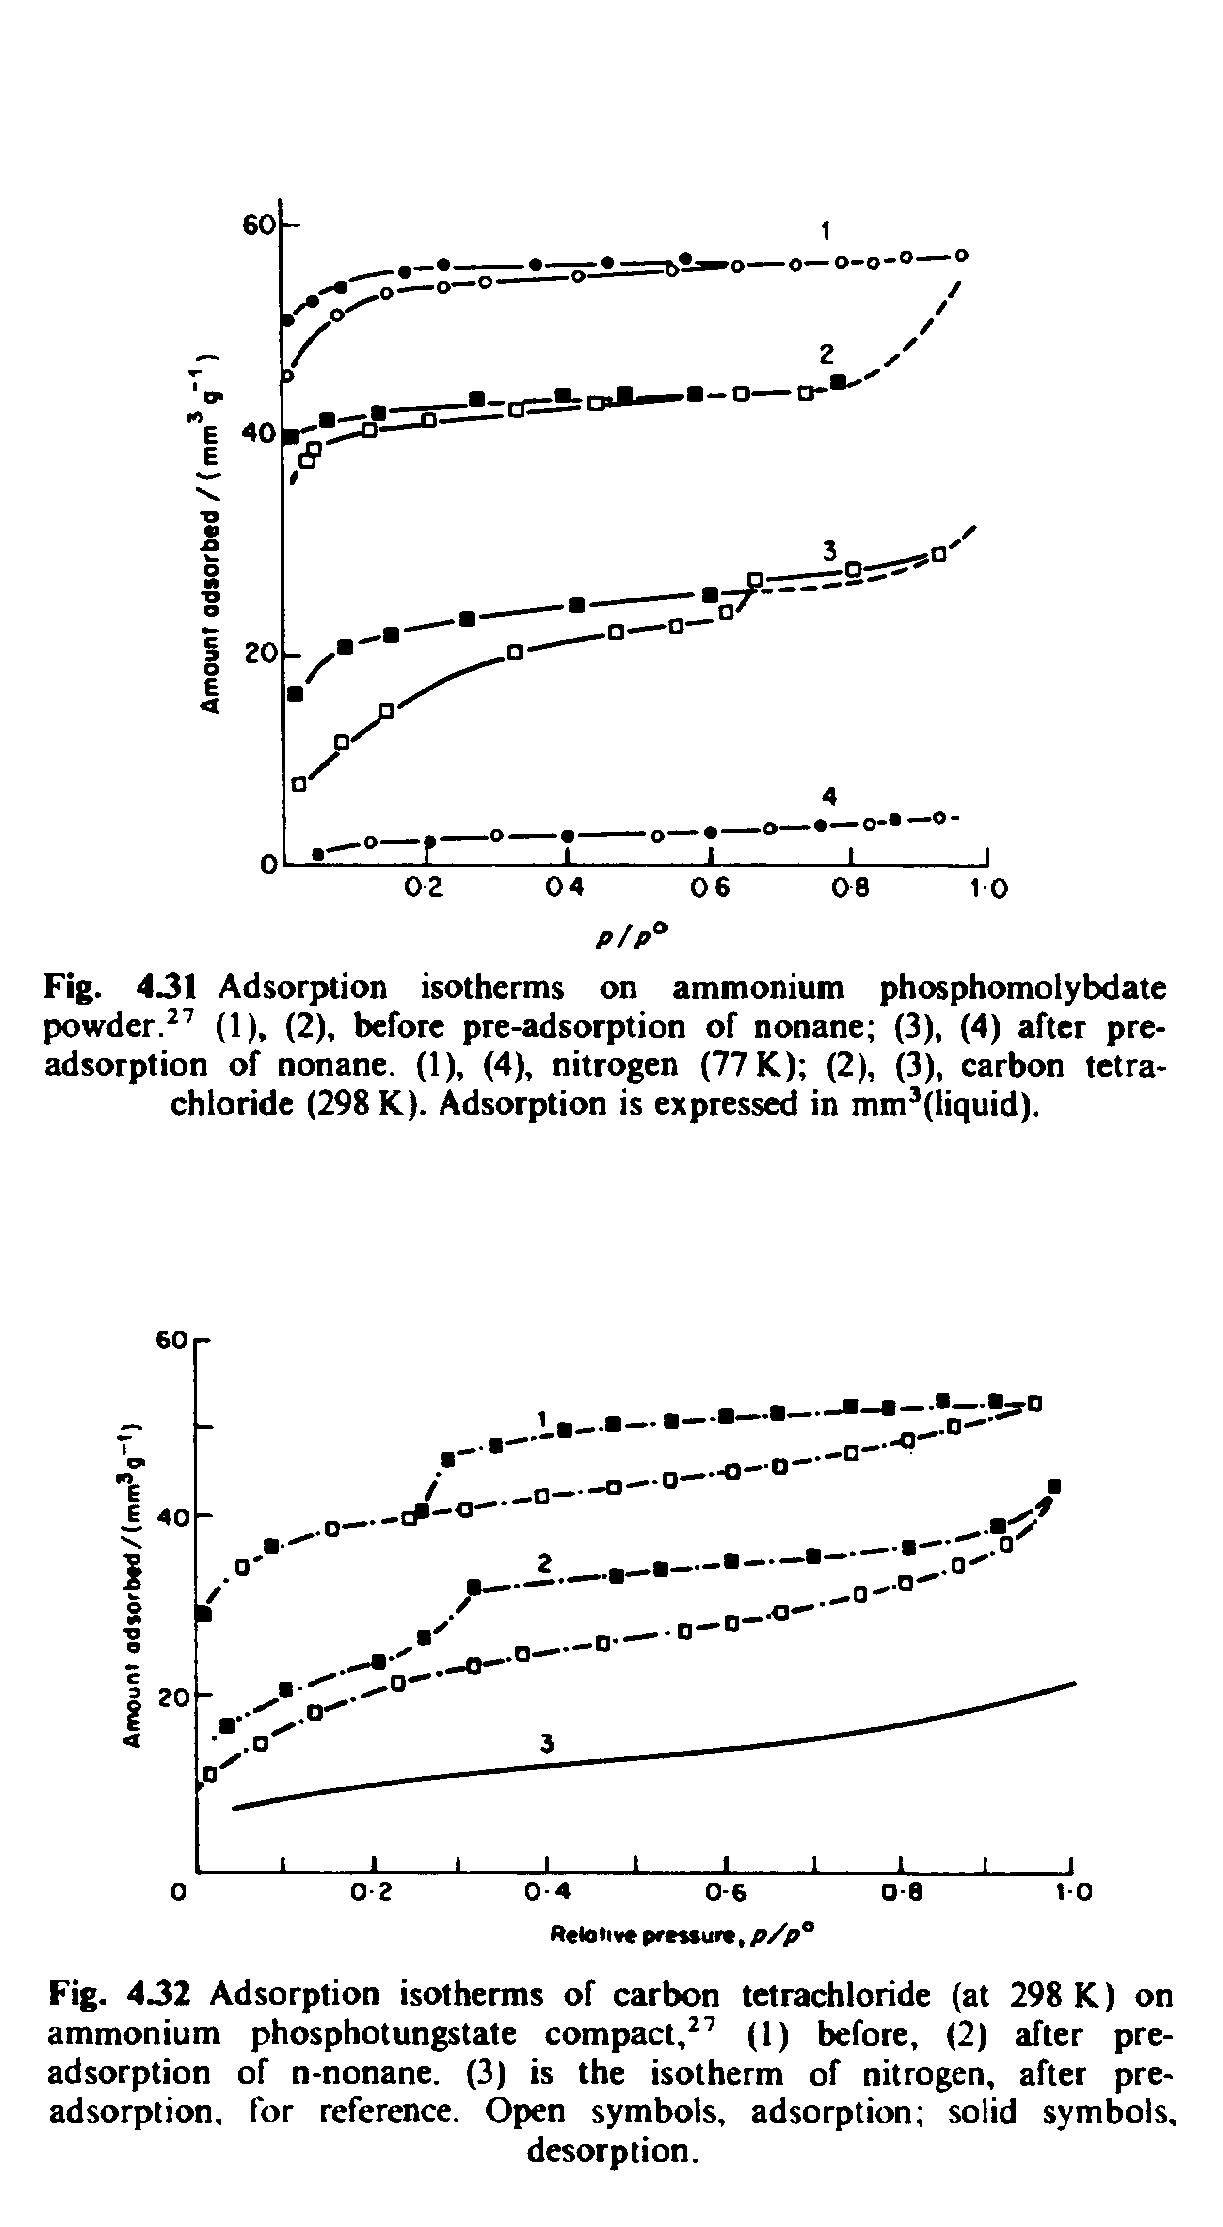 Fig. 4J2 Adsorption isotherms of carbon tetrachloride (at 298 K) on ammonium phosphotungstate compact, (1) before, (2) after preadsorption of n-nonane. (3) is the isotherm of nitrogen, after preadsorption, for reference. Open symbols, adsorption solid symbols,...